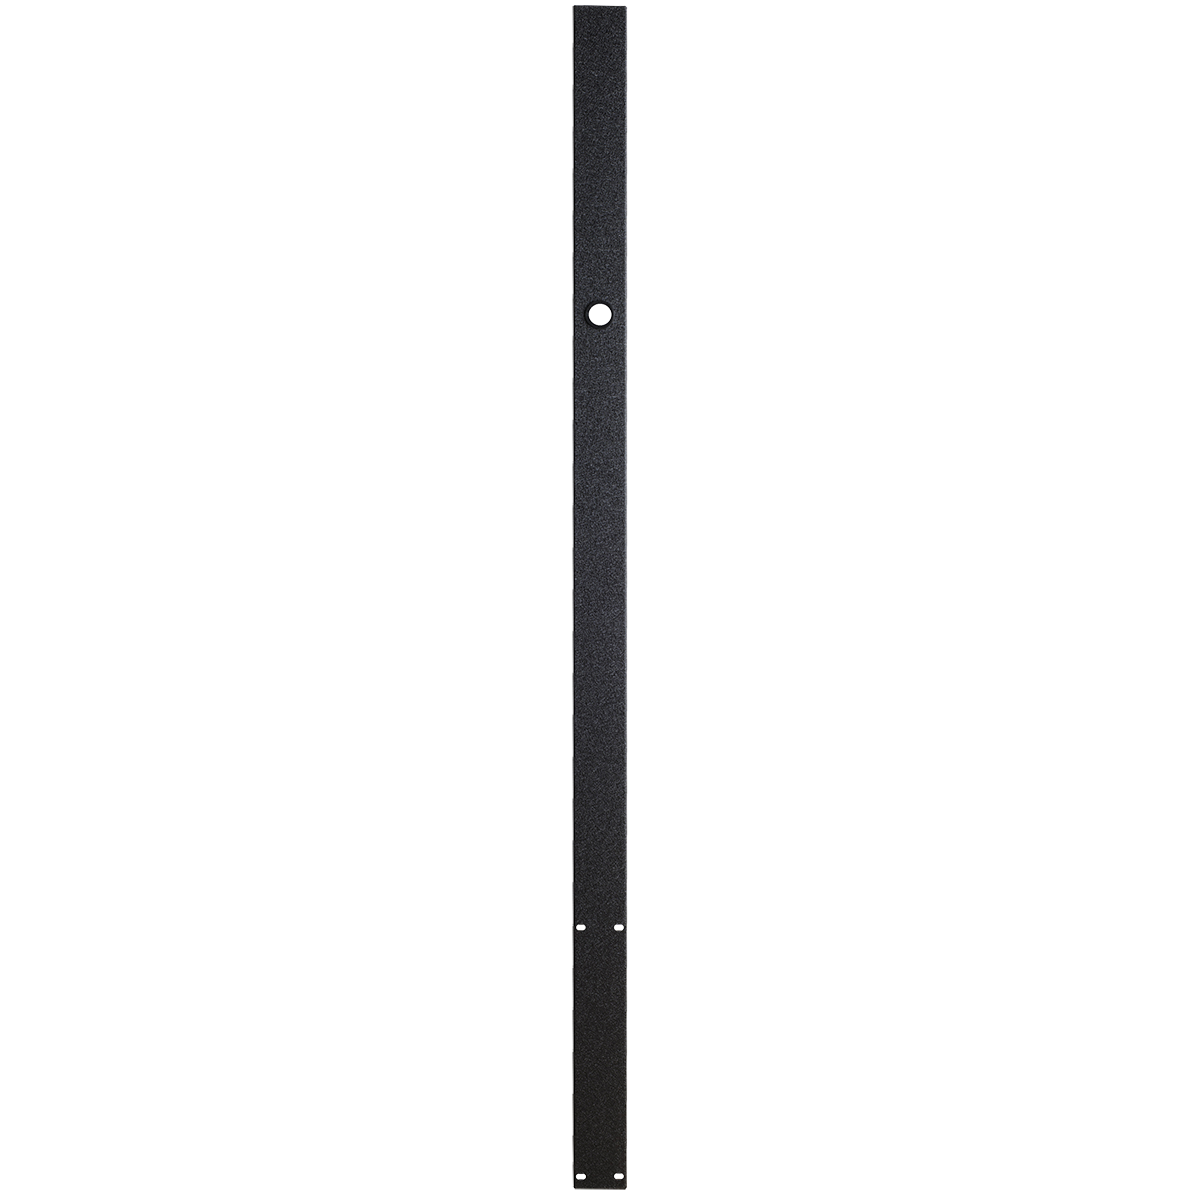 Double-sided panel connector - black granite painting